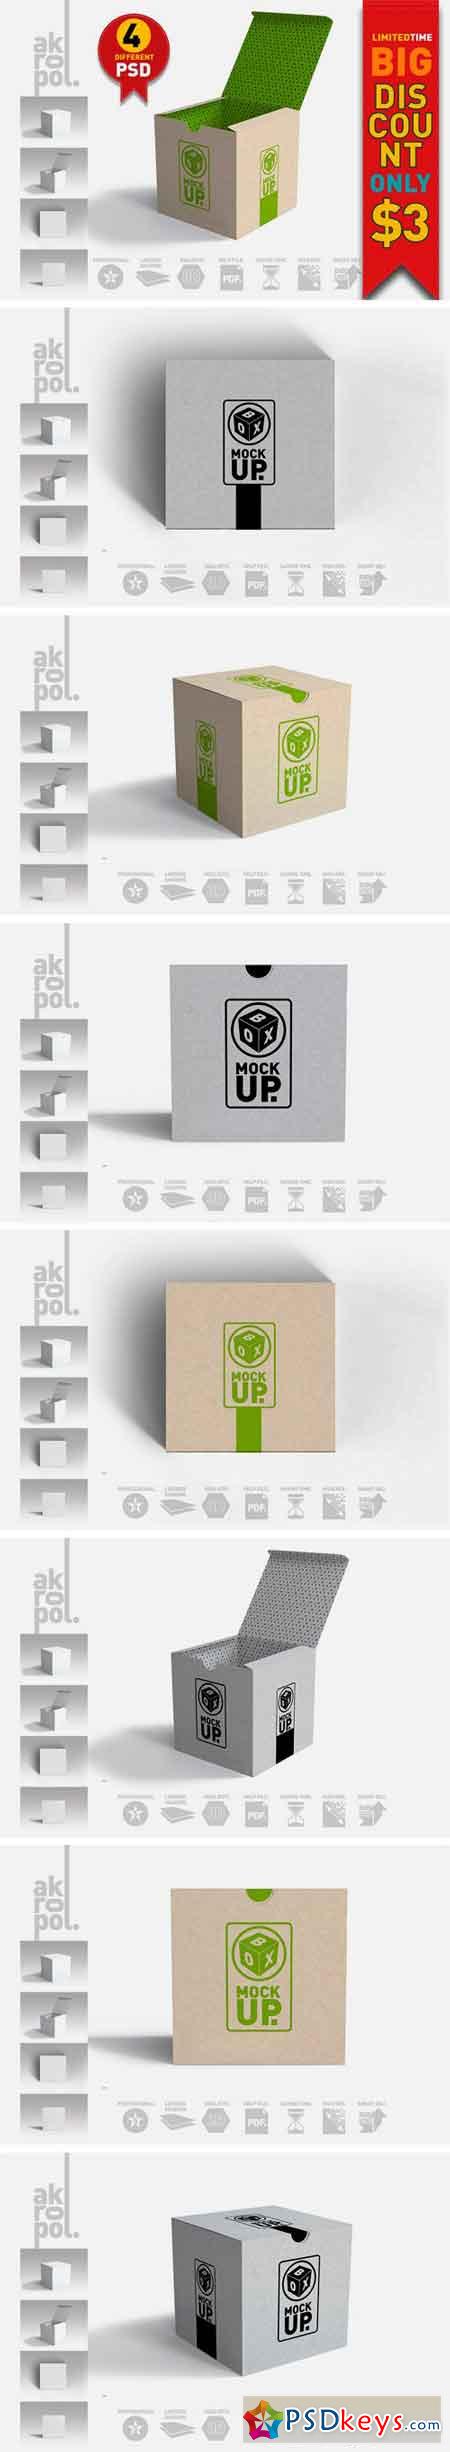 Graphicriver brilliant 3d box action pack 4787743 download free pc